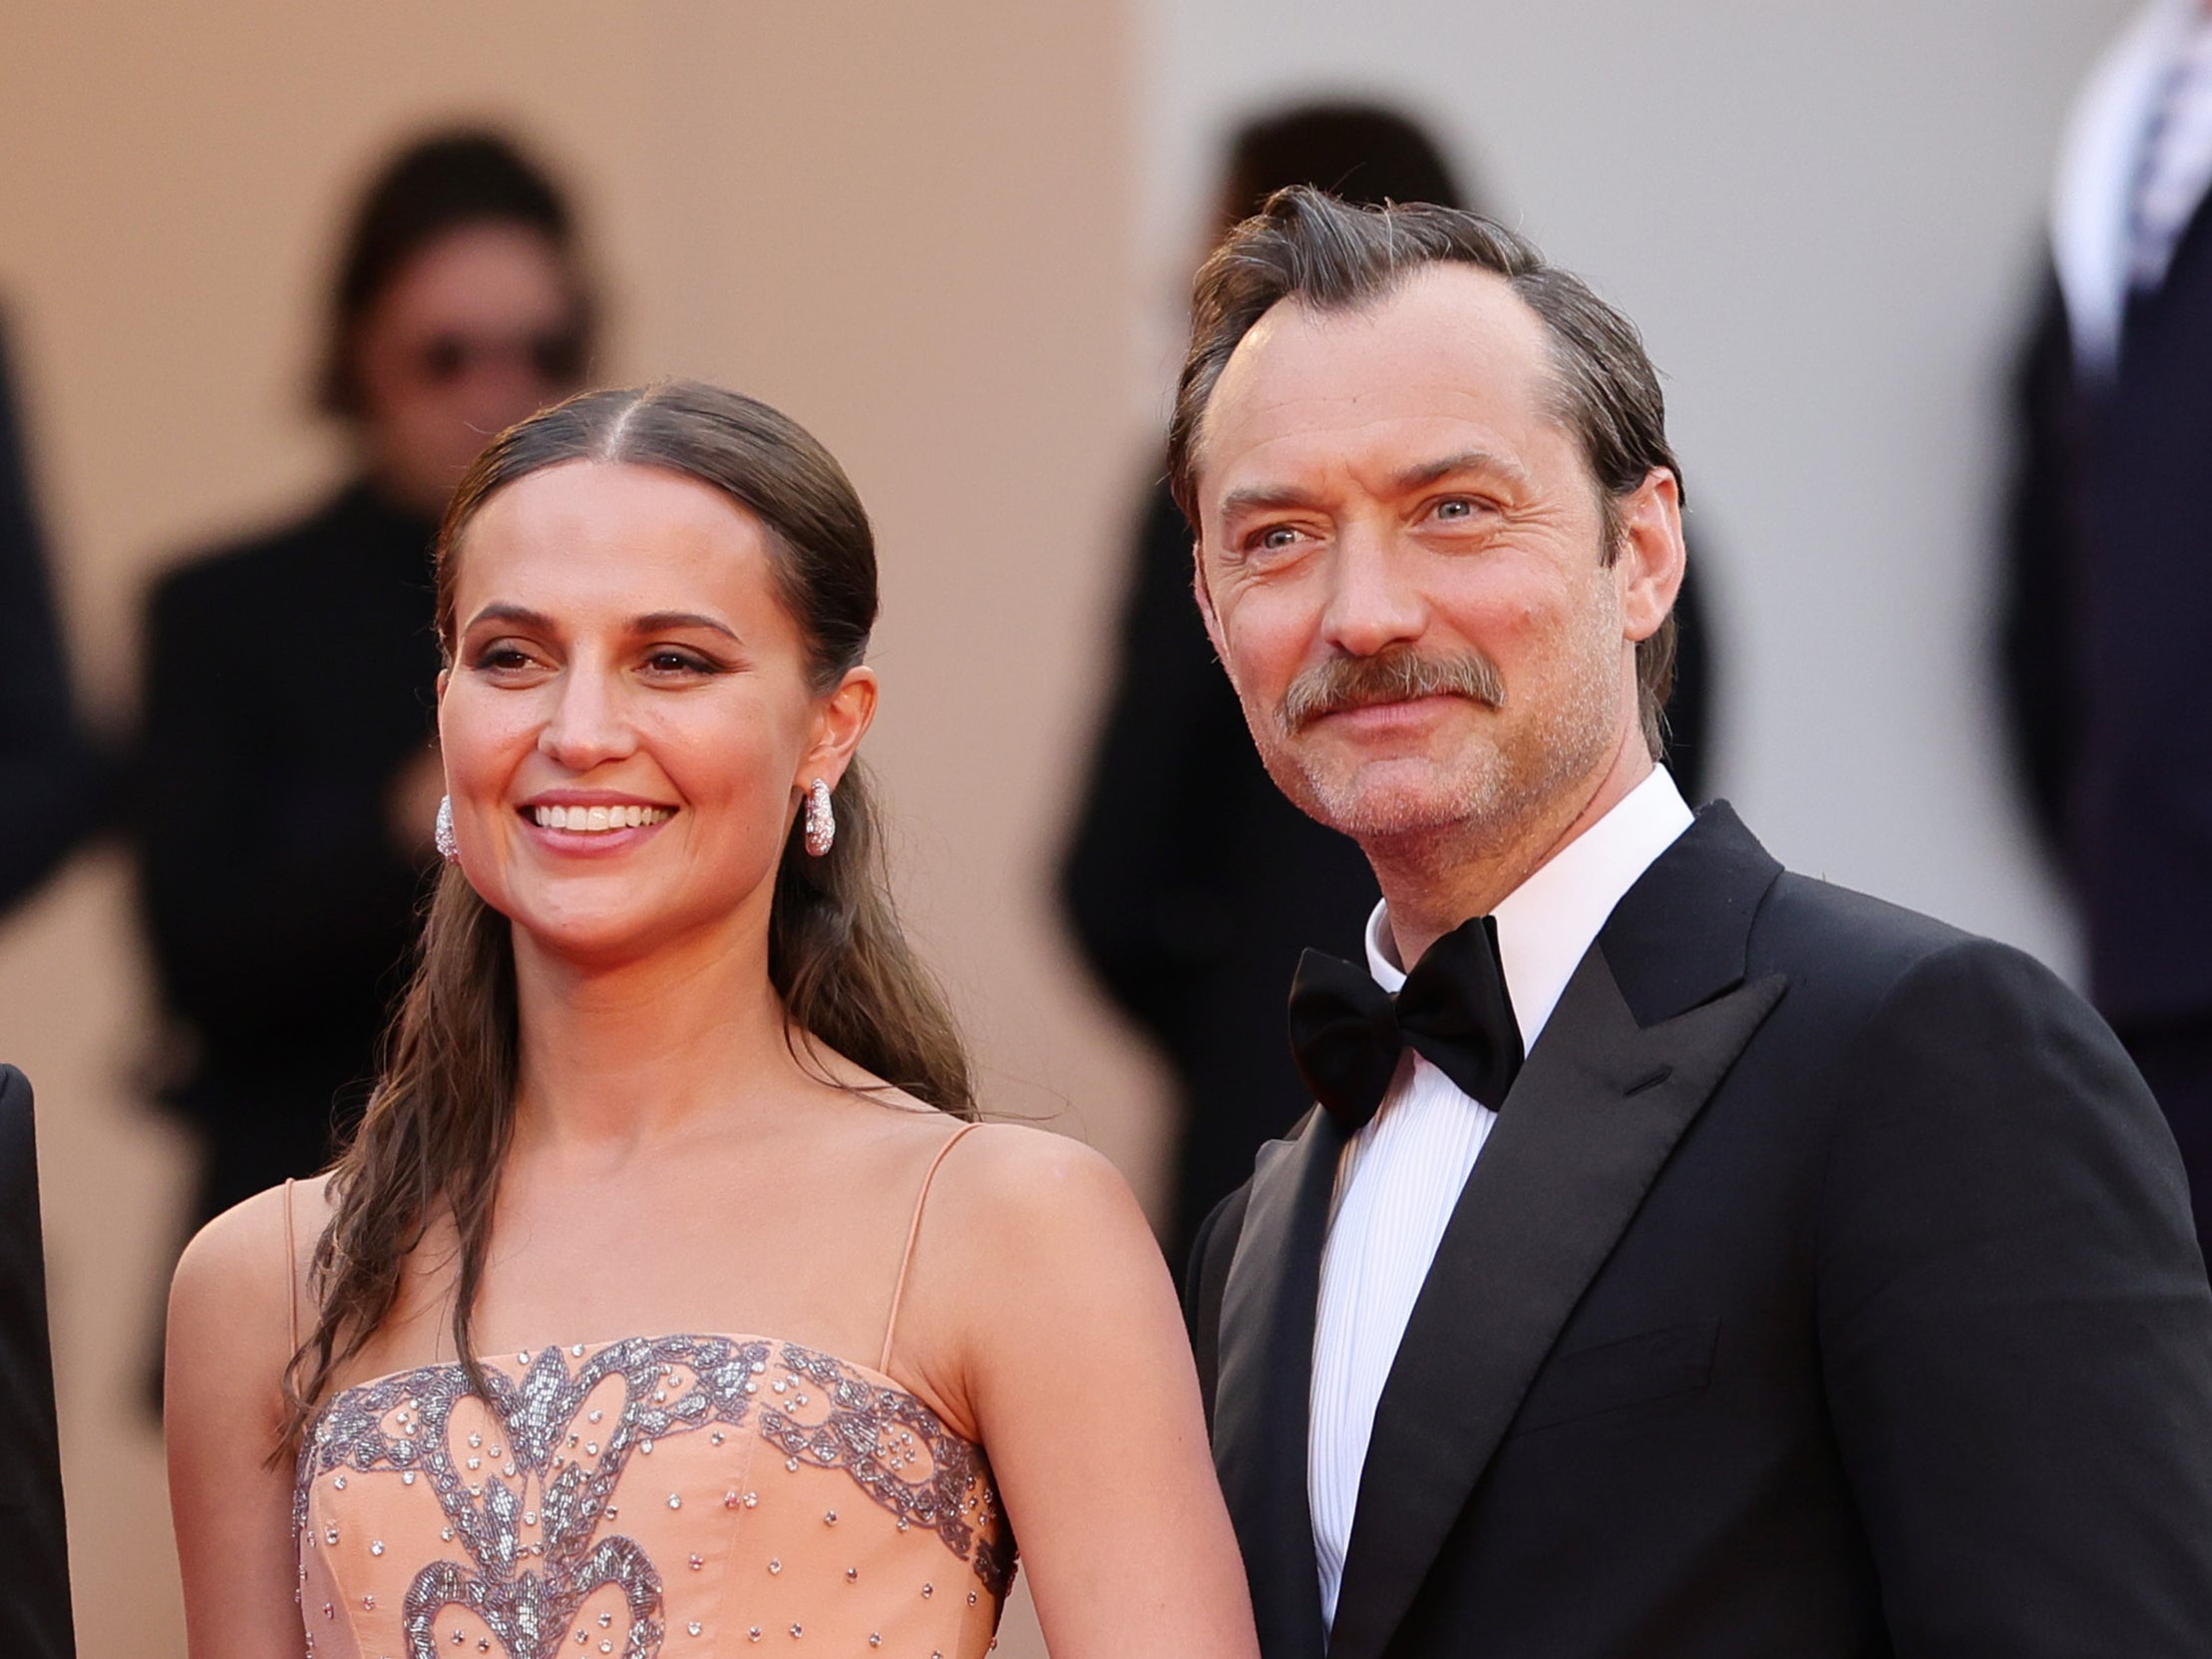 Firebrand: Alicia Vikander and Jude Law get eight-minute standing